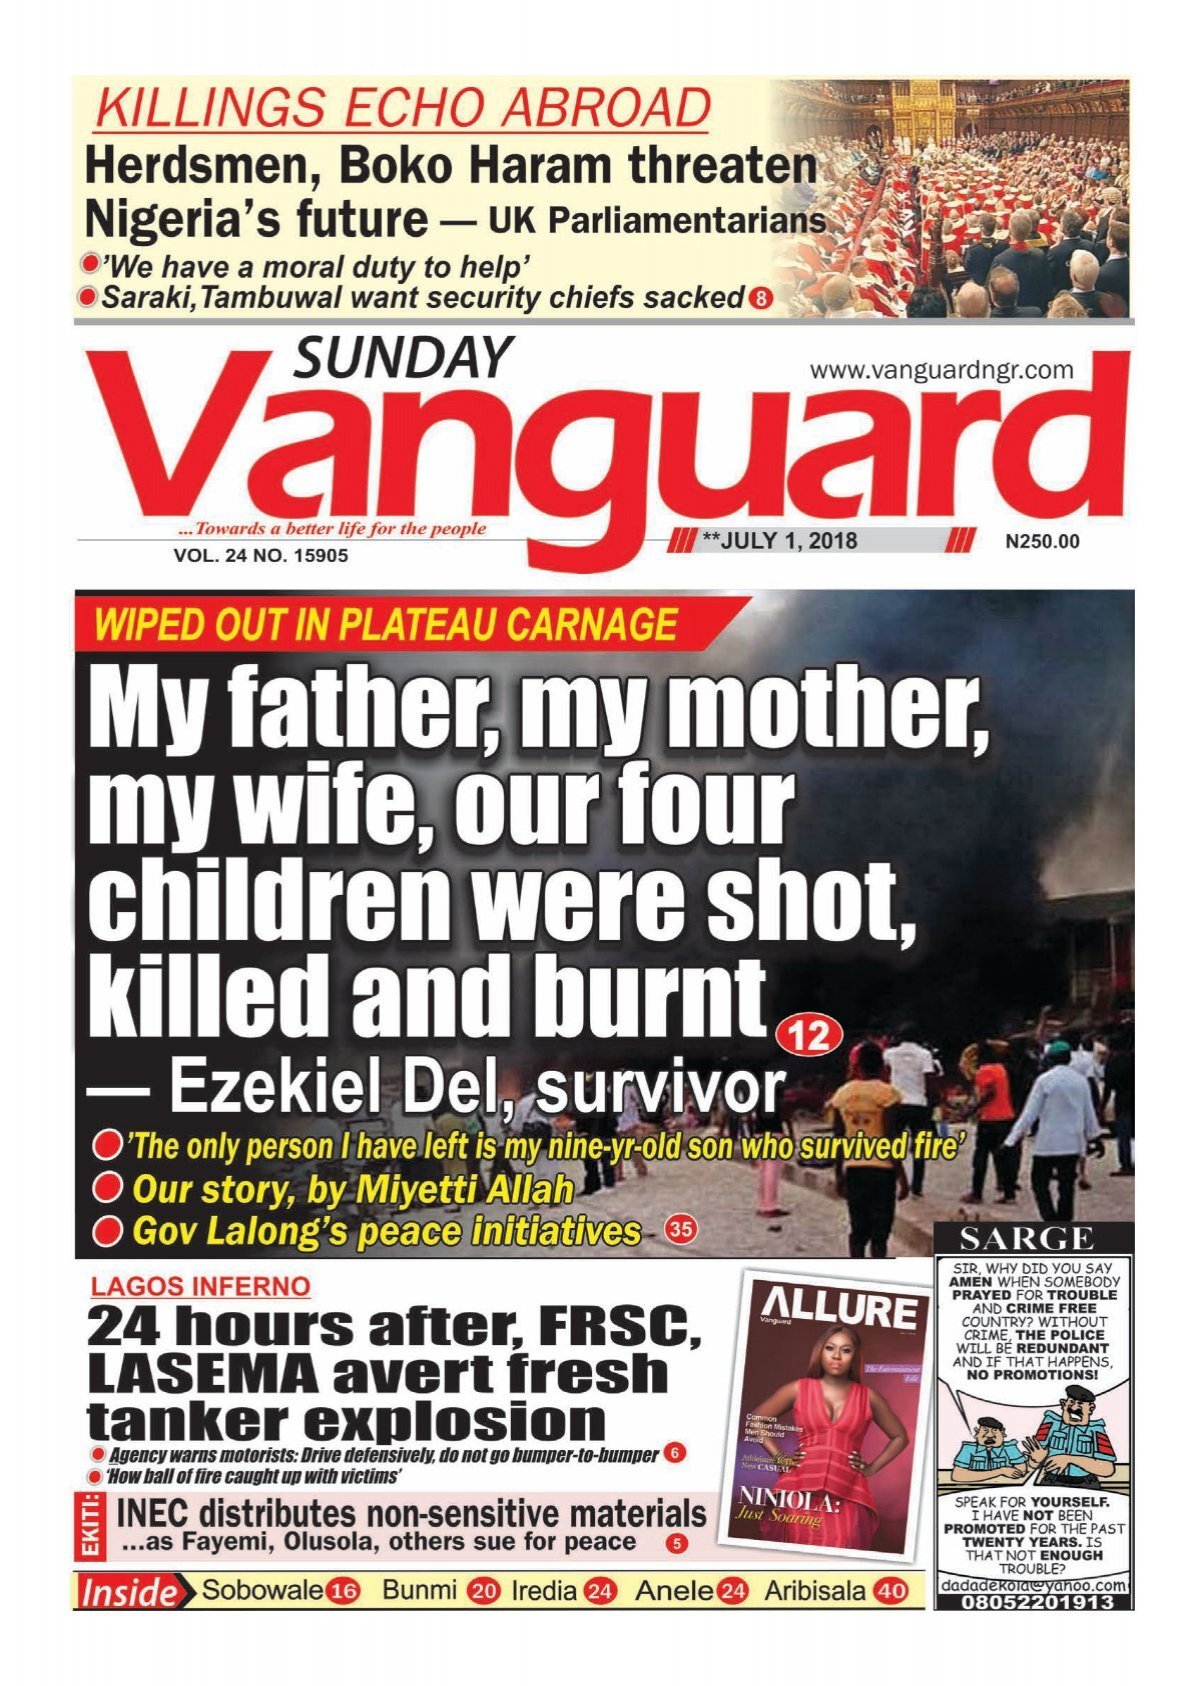 Alert Rundt og rundt stof 01072018 - WIPED OUT IN PLATEAU CARNAGE : My father, my mother, my wife,  our four children were shot killed and burnt